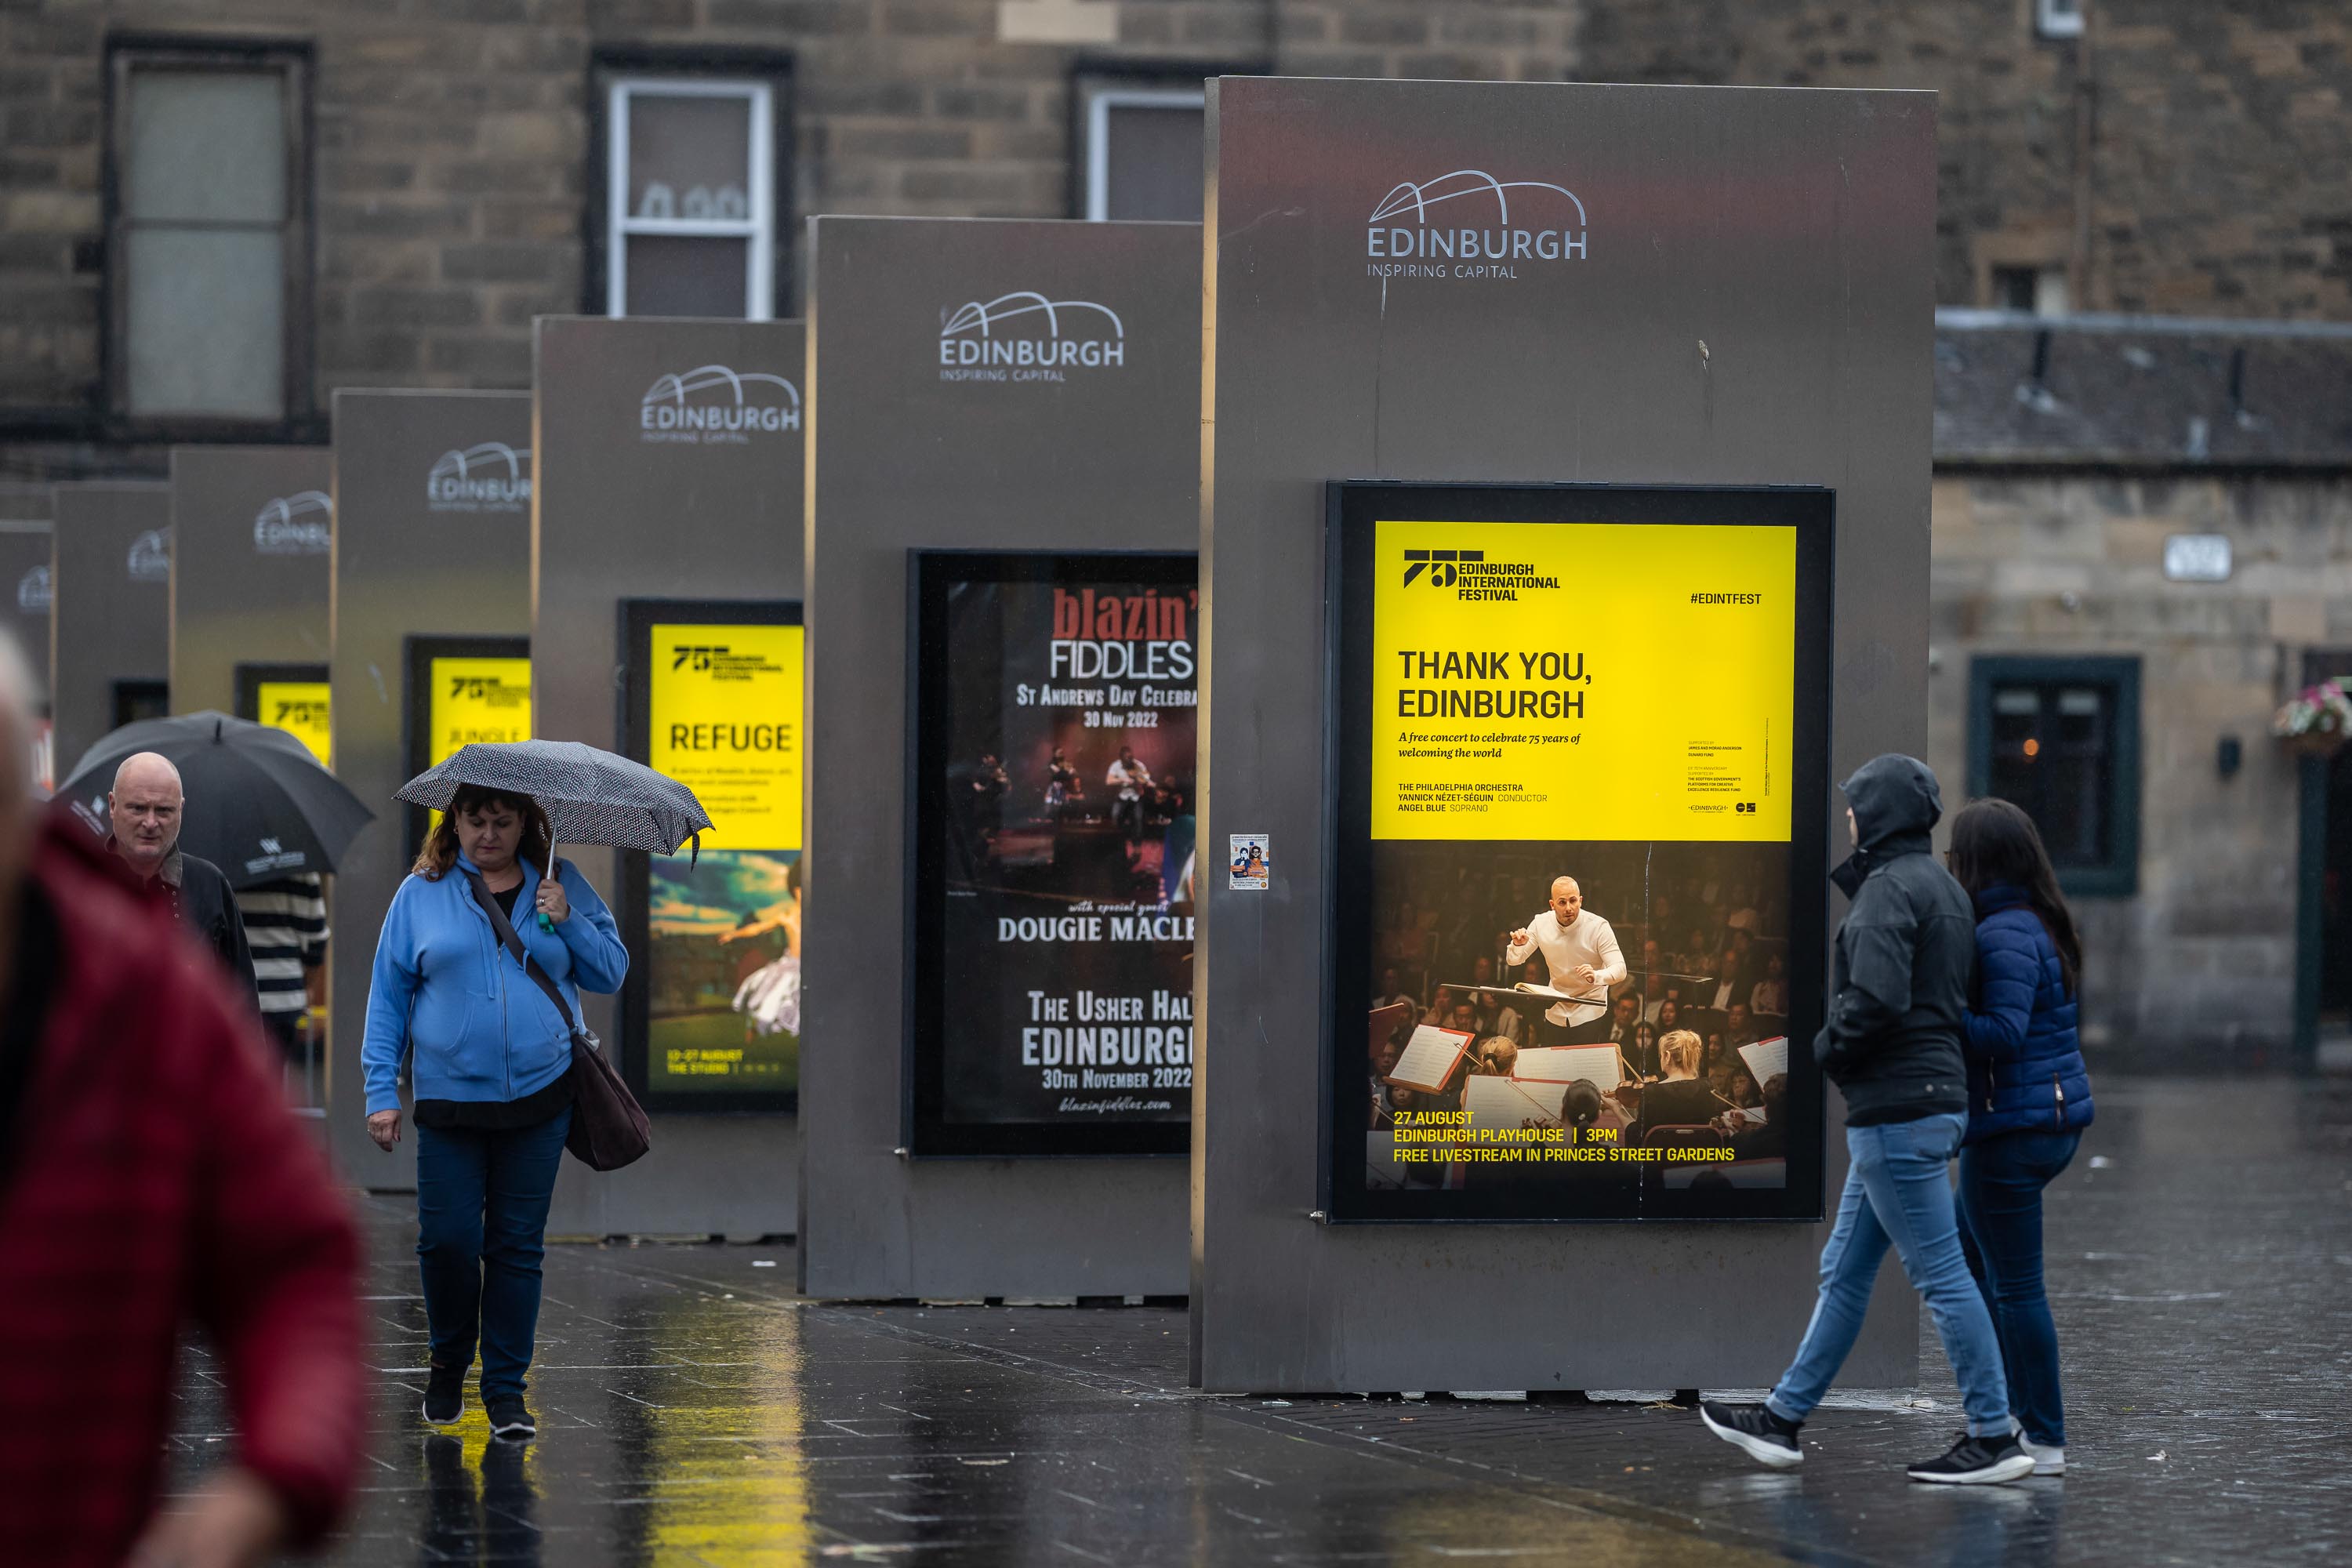 Outside Usher Hall are posters for upcoming events, including the Orchestra’s final concert